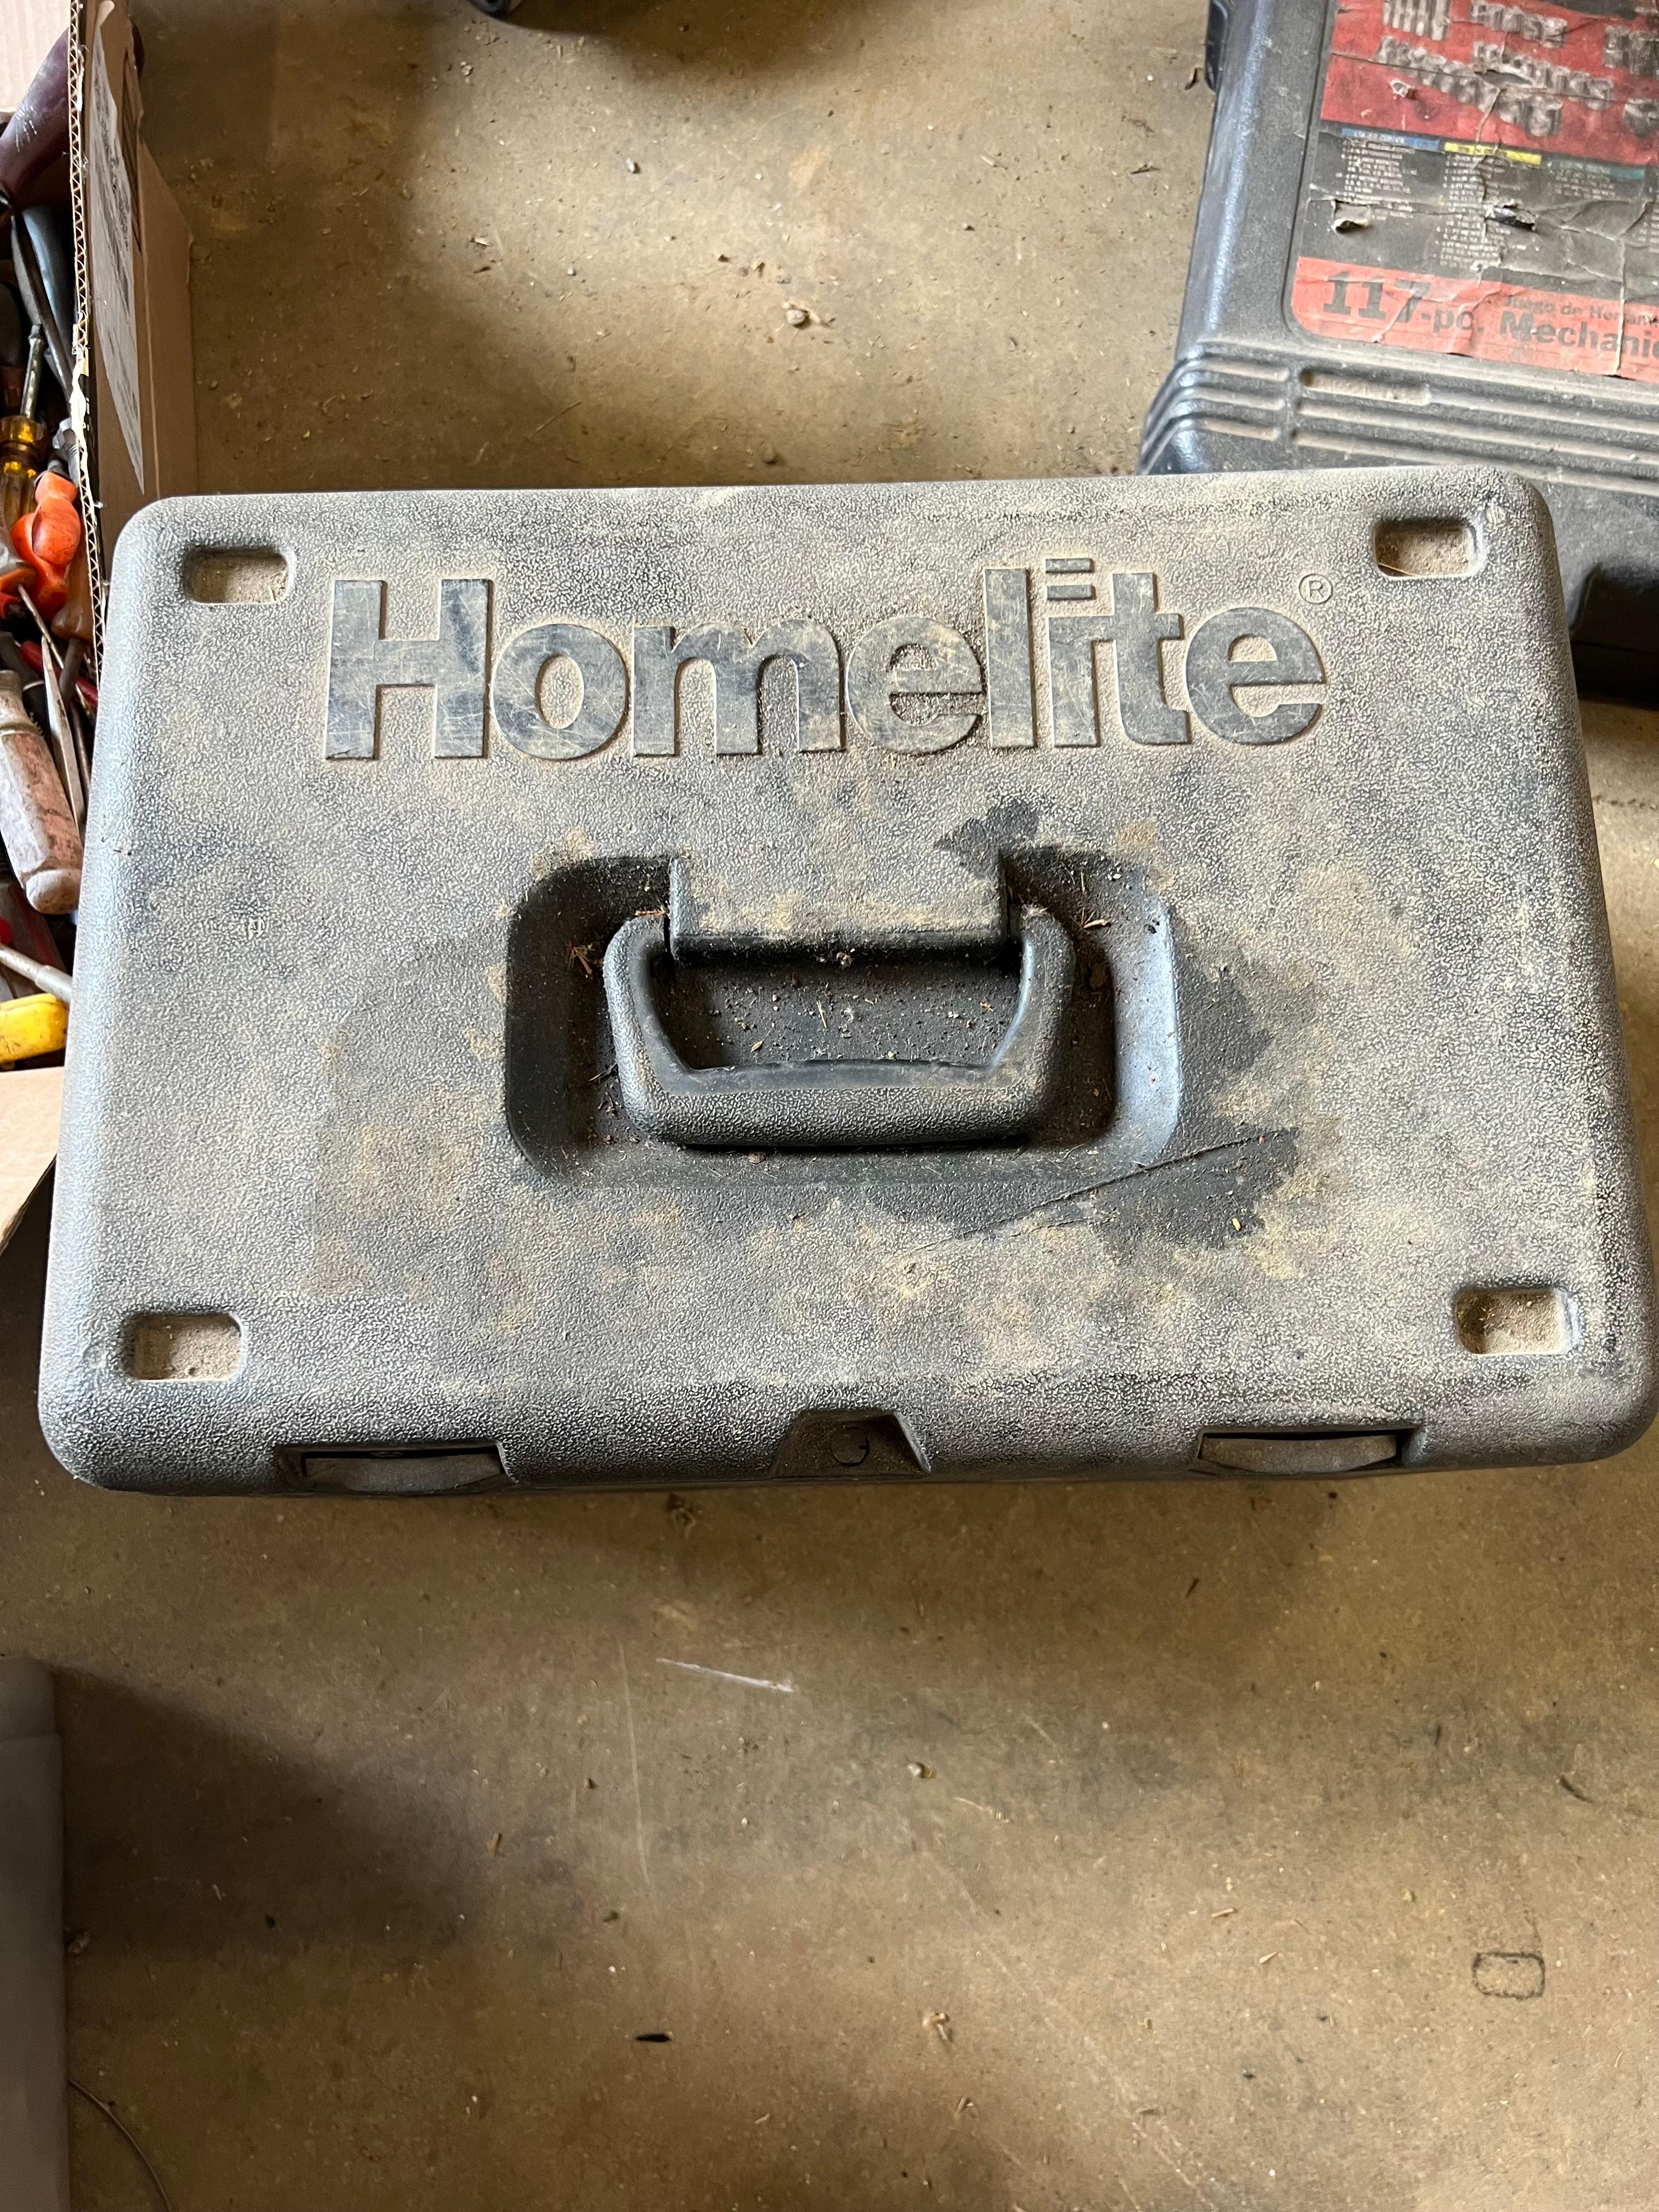 Craftsman Sockets & Homelite Chainsaw Case Only